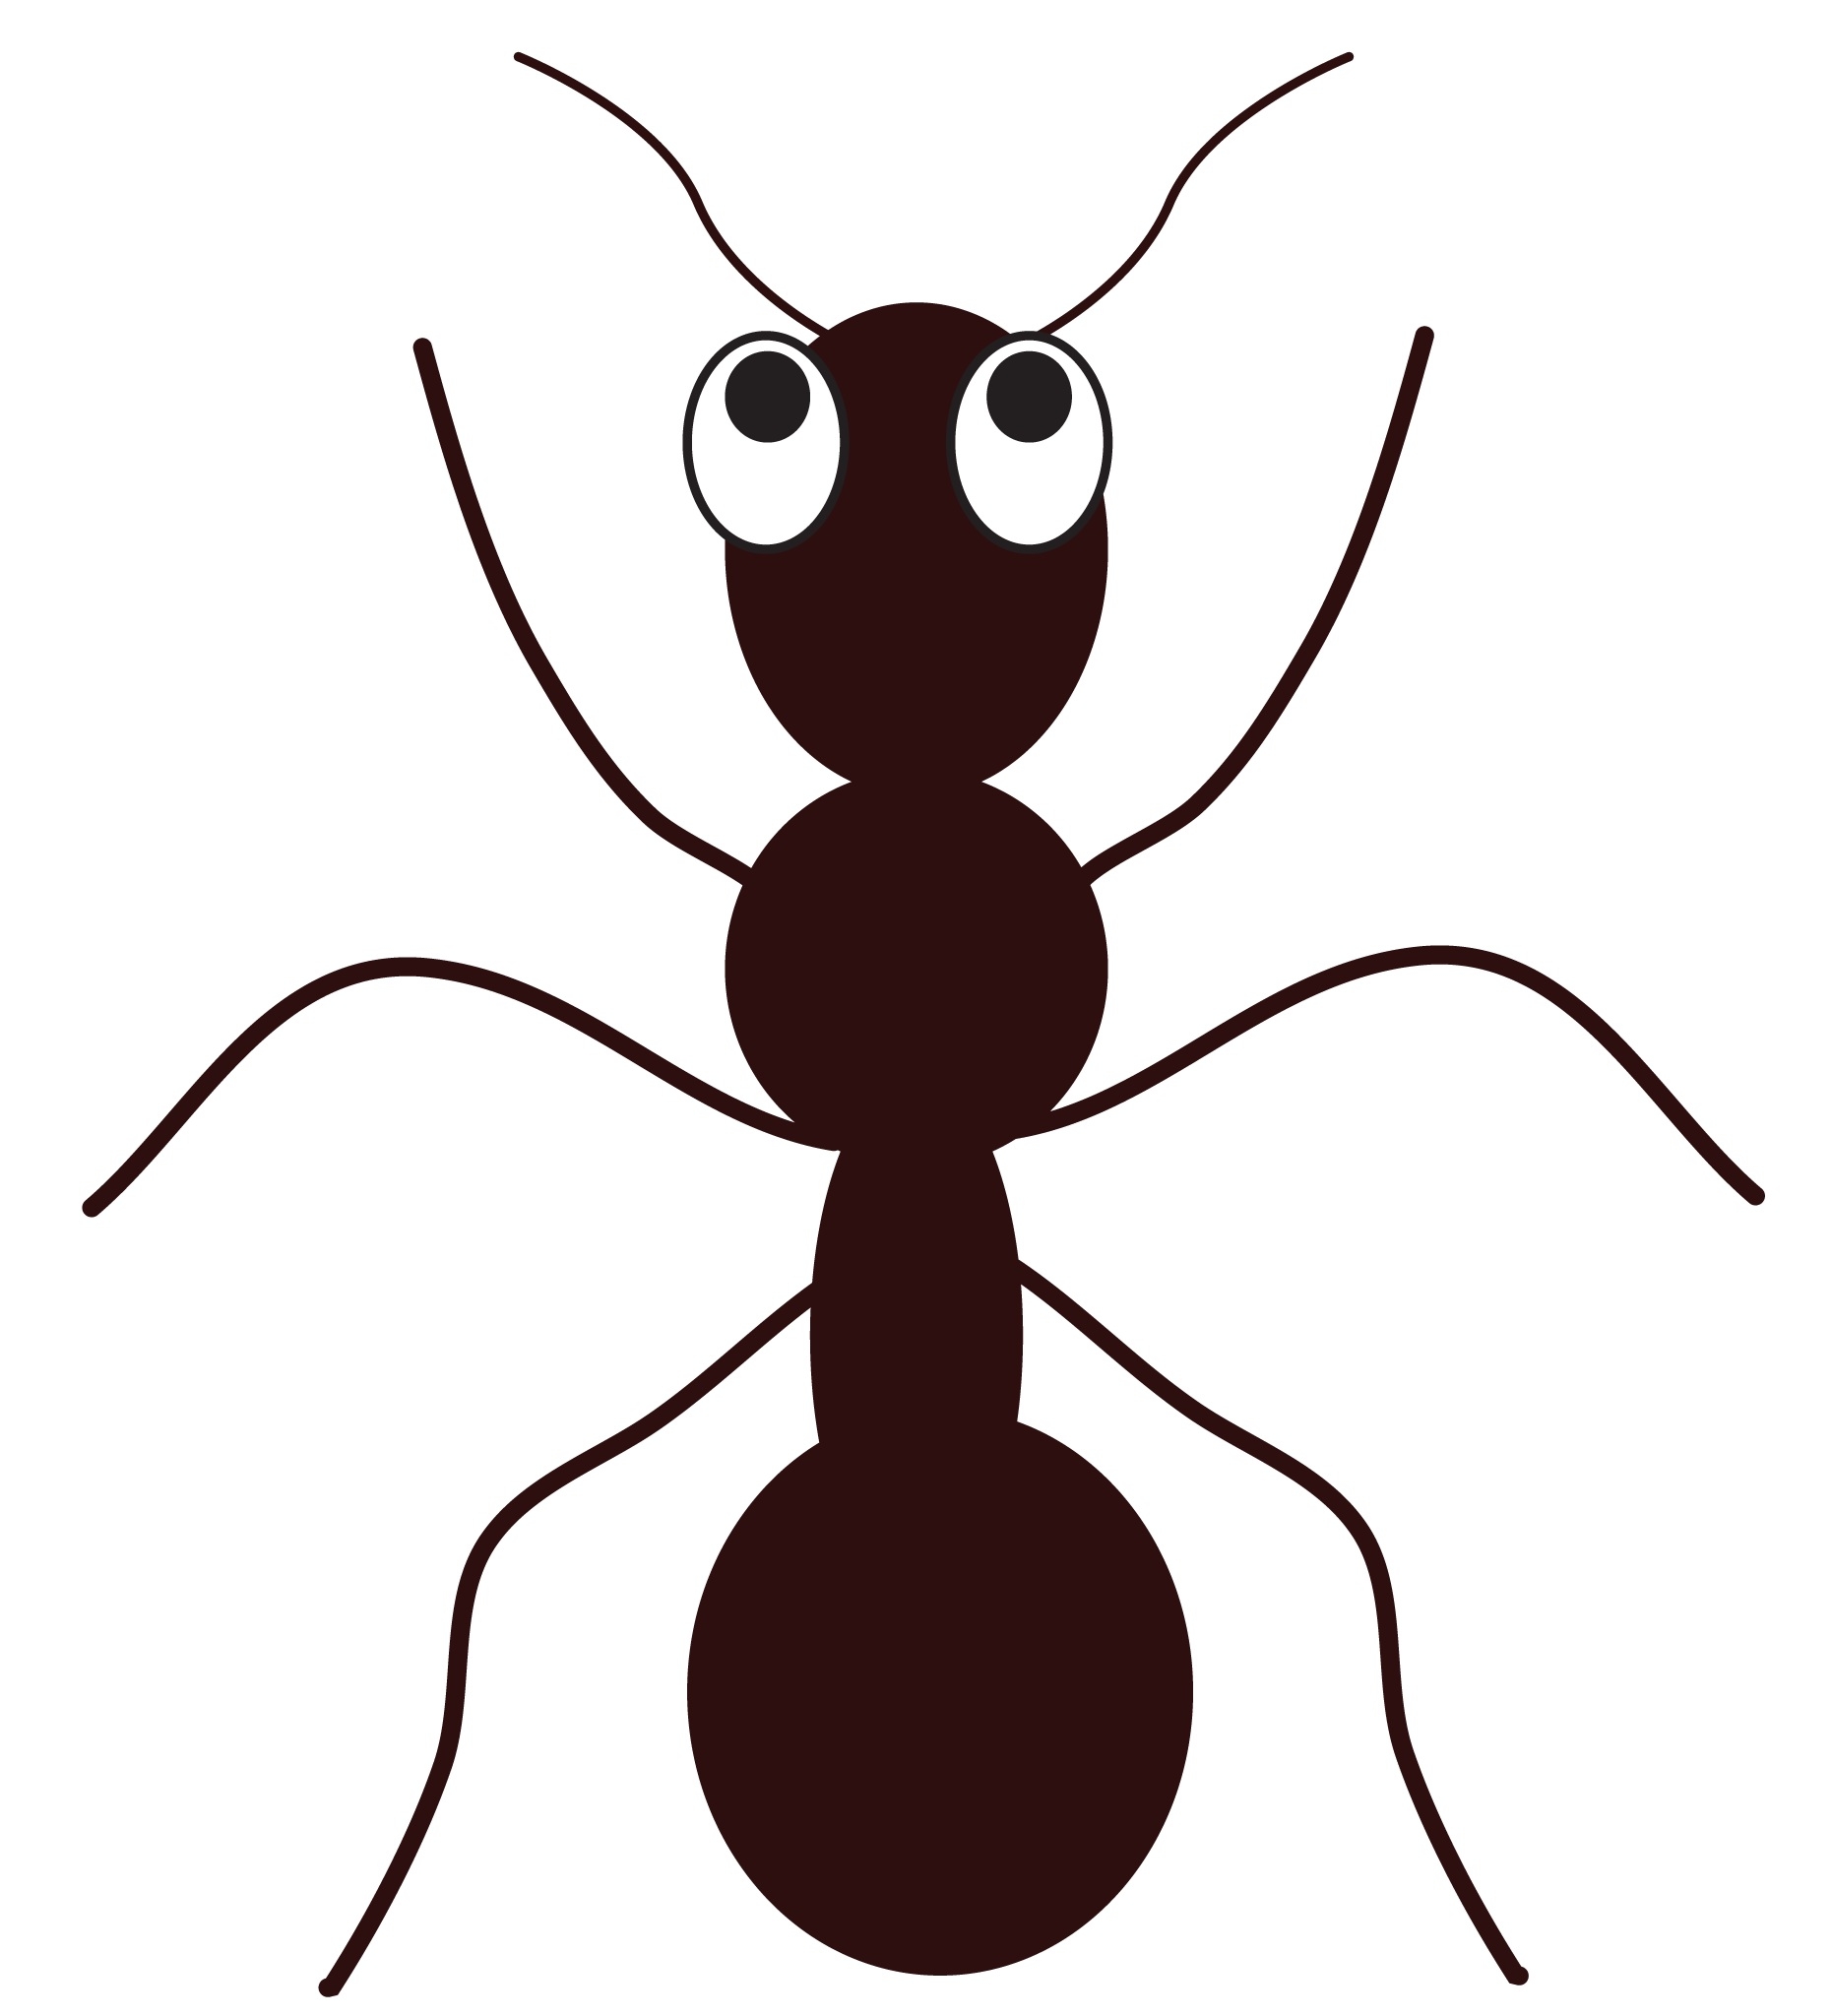 Wonderful of ants letter. Ant clipart line